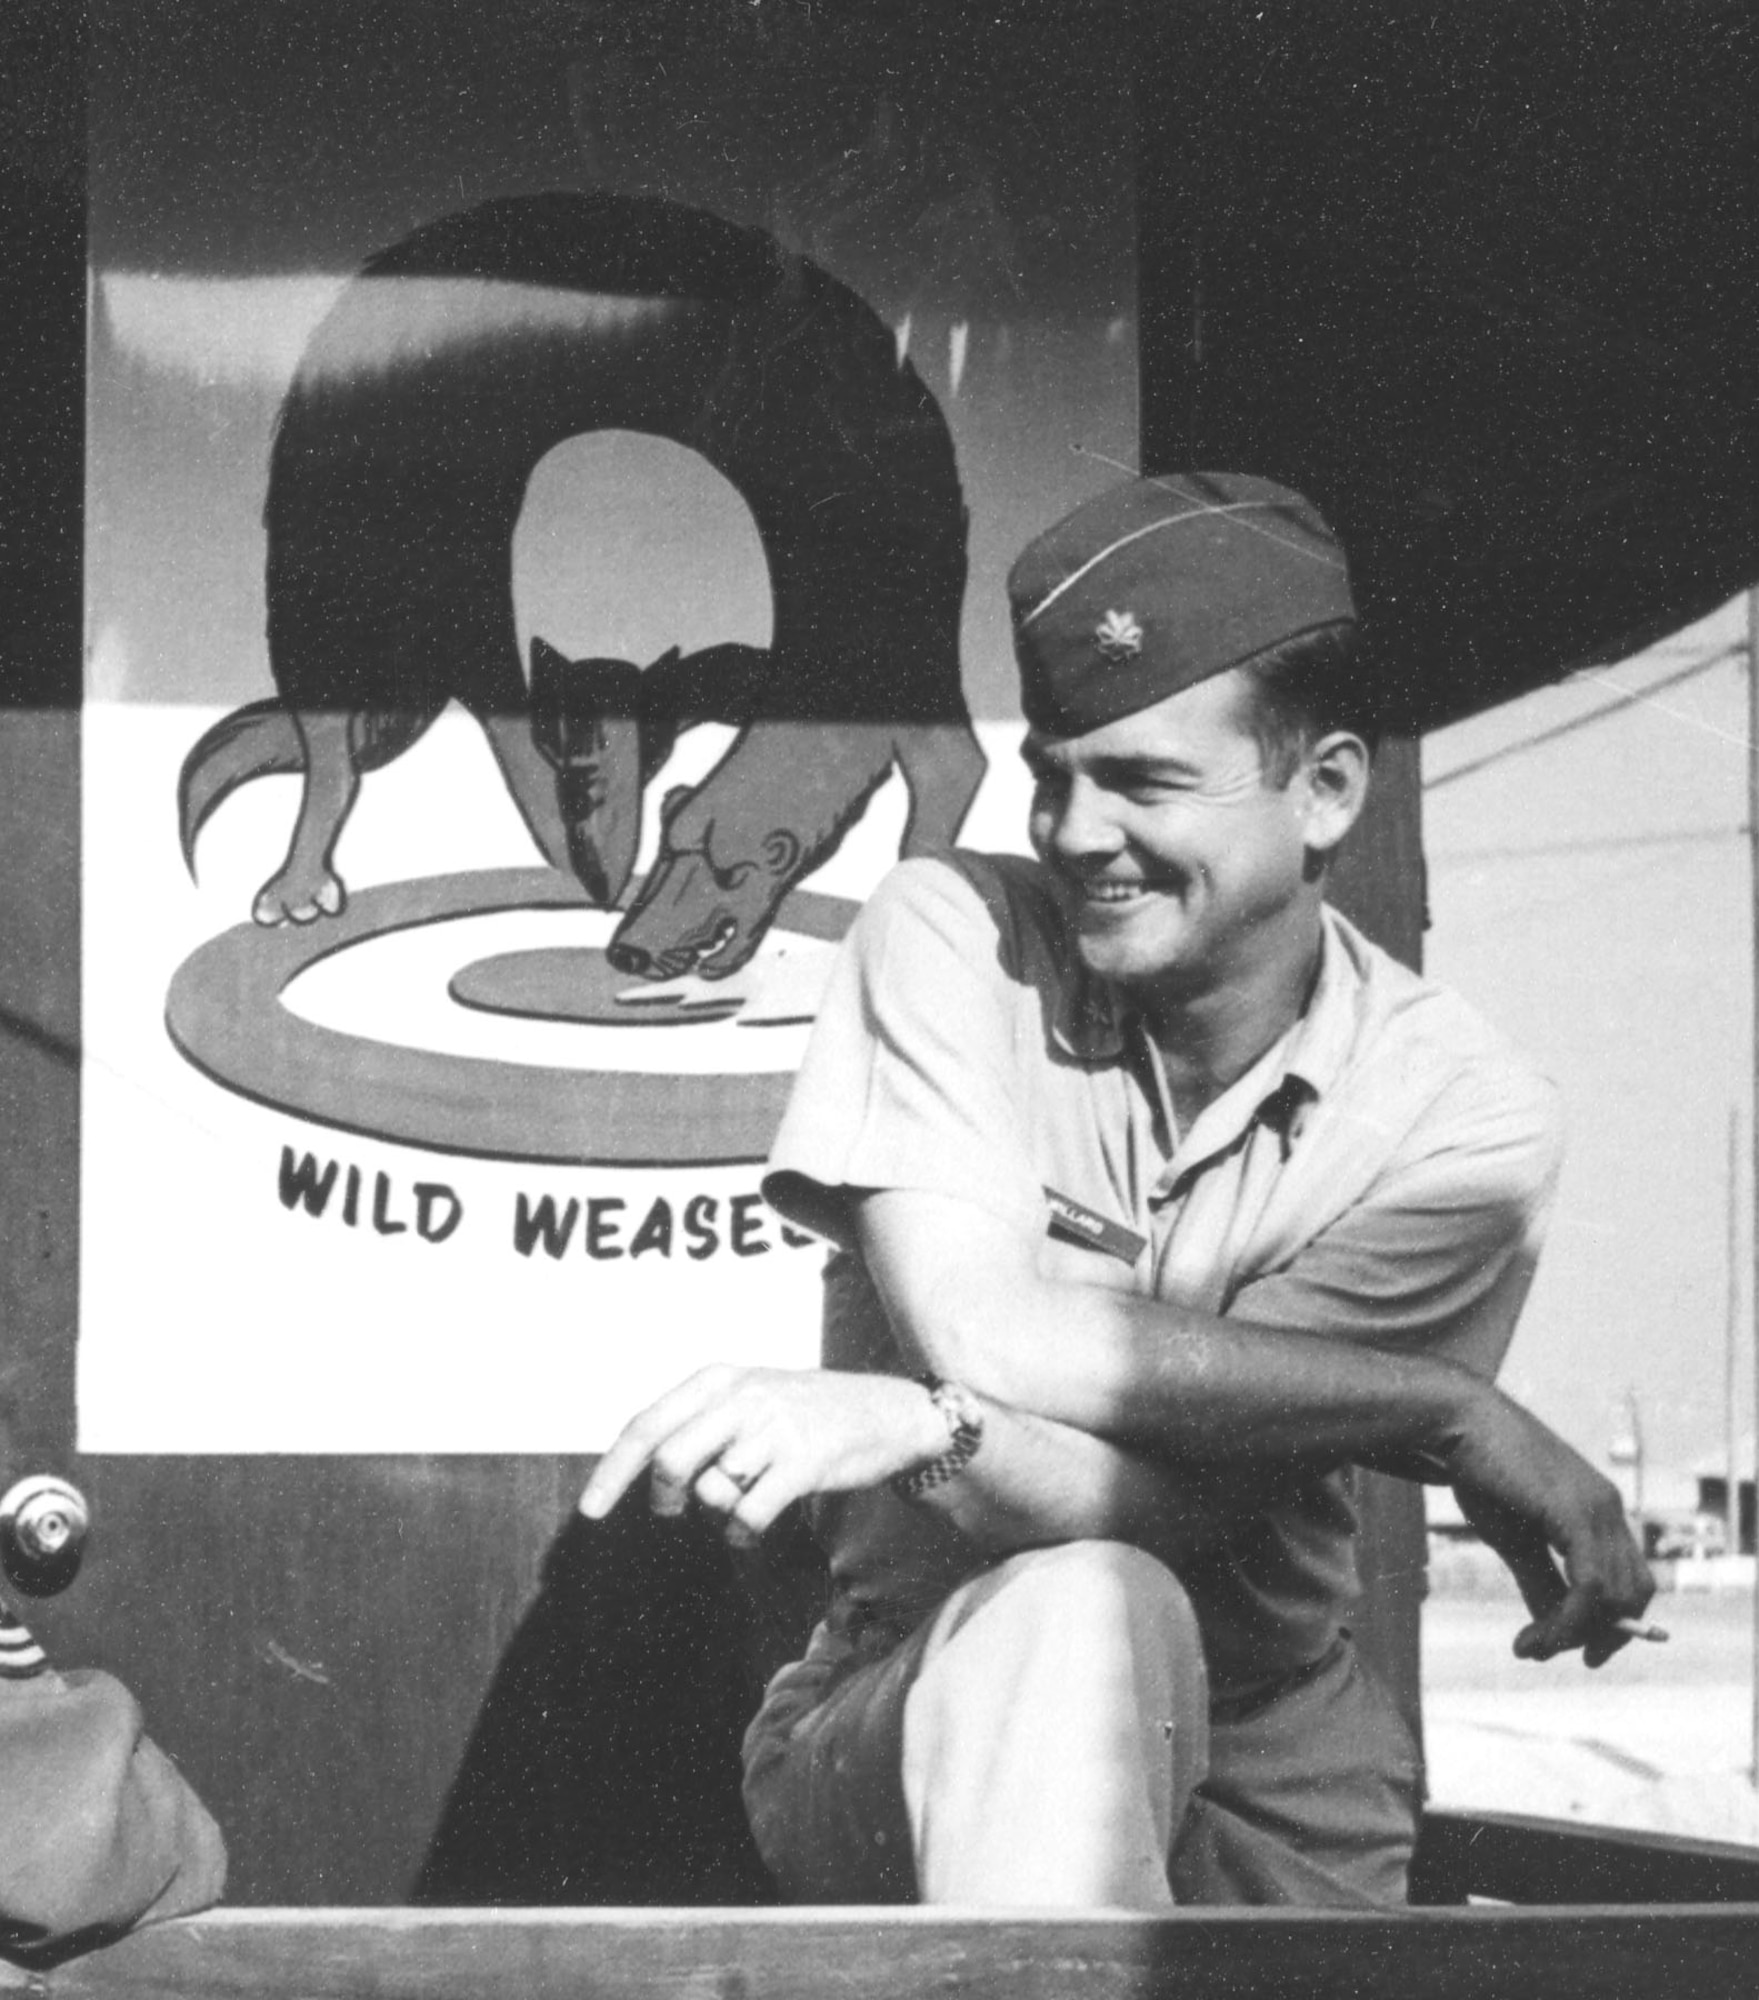 Wild Weasel commander Maj. Garry Willard at Korat, Thailand. He later returned to the U.S. to head the Wild Weasel school at Nellis AFB. Willard later retired from the USAF as a brigadier general. (U.S. Air Force photo)